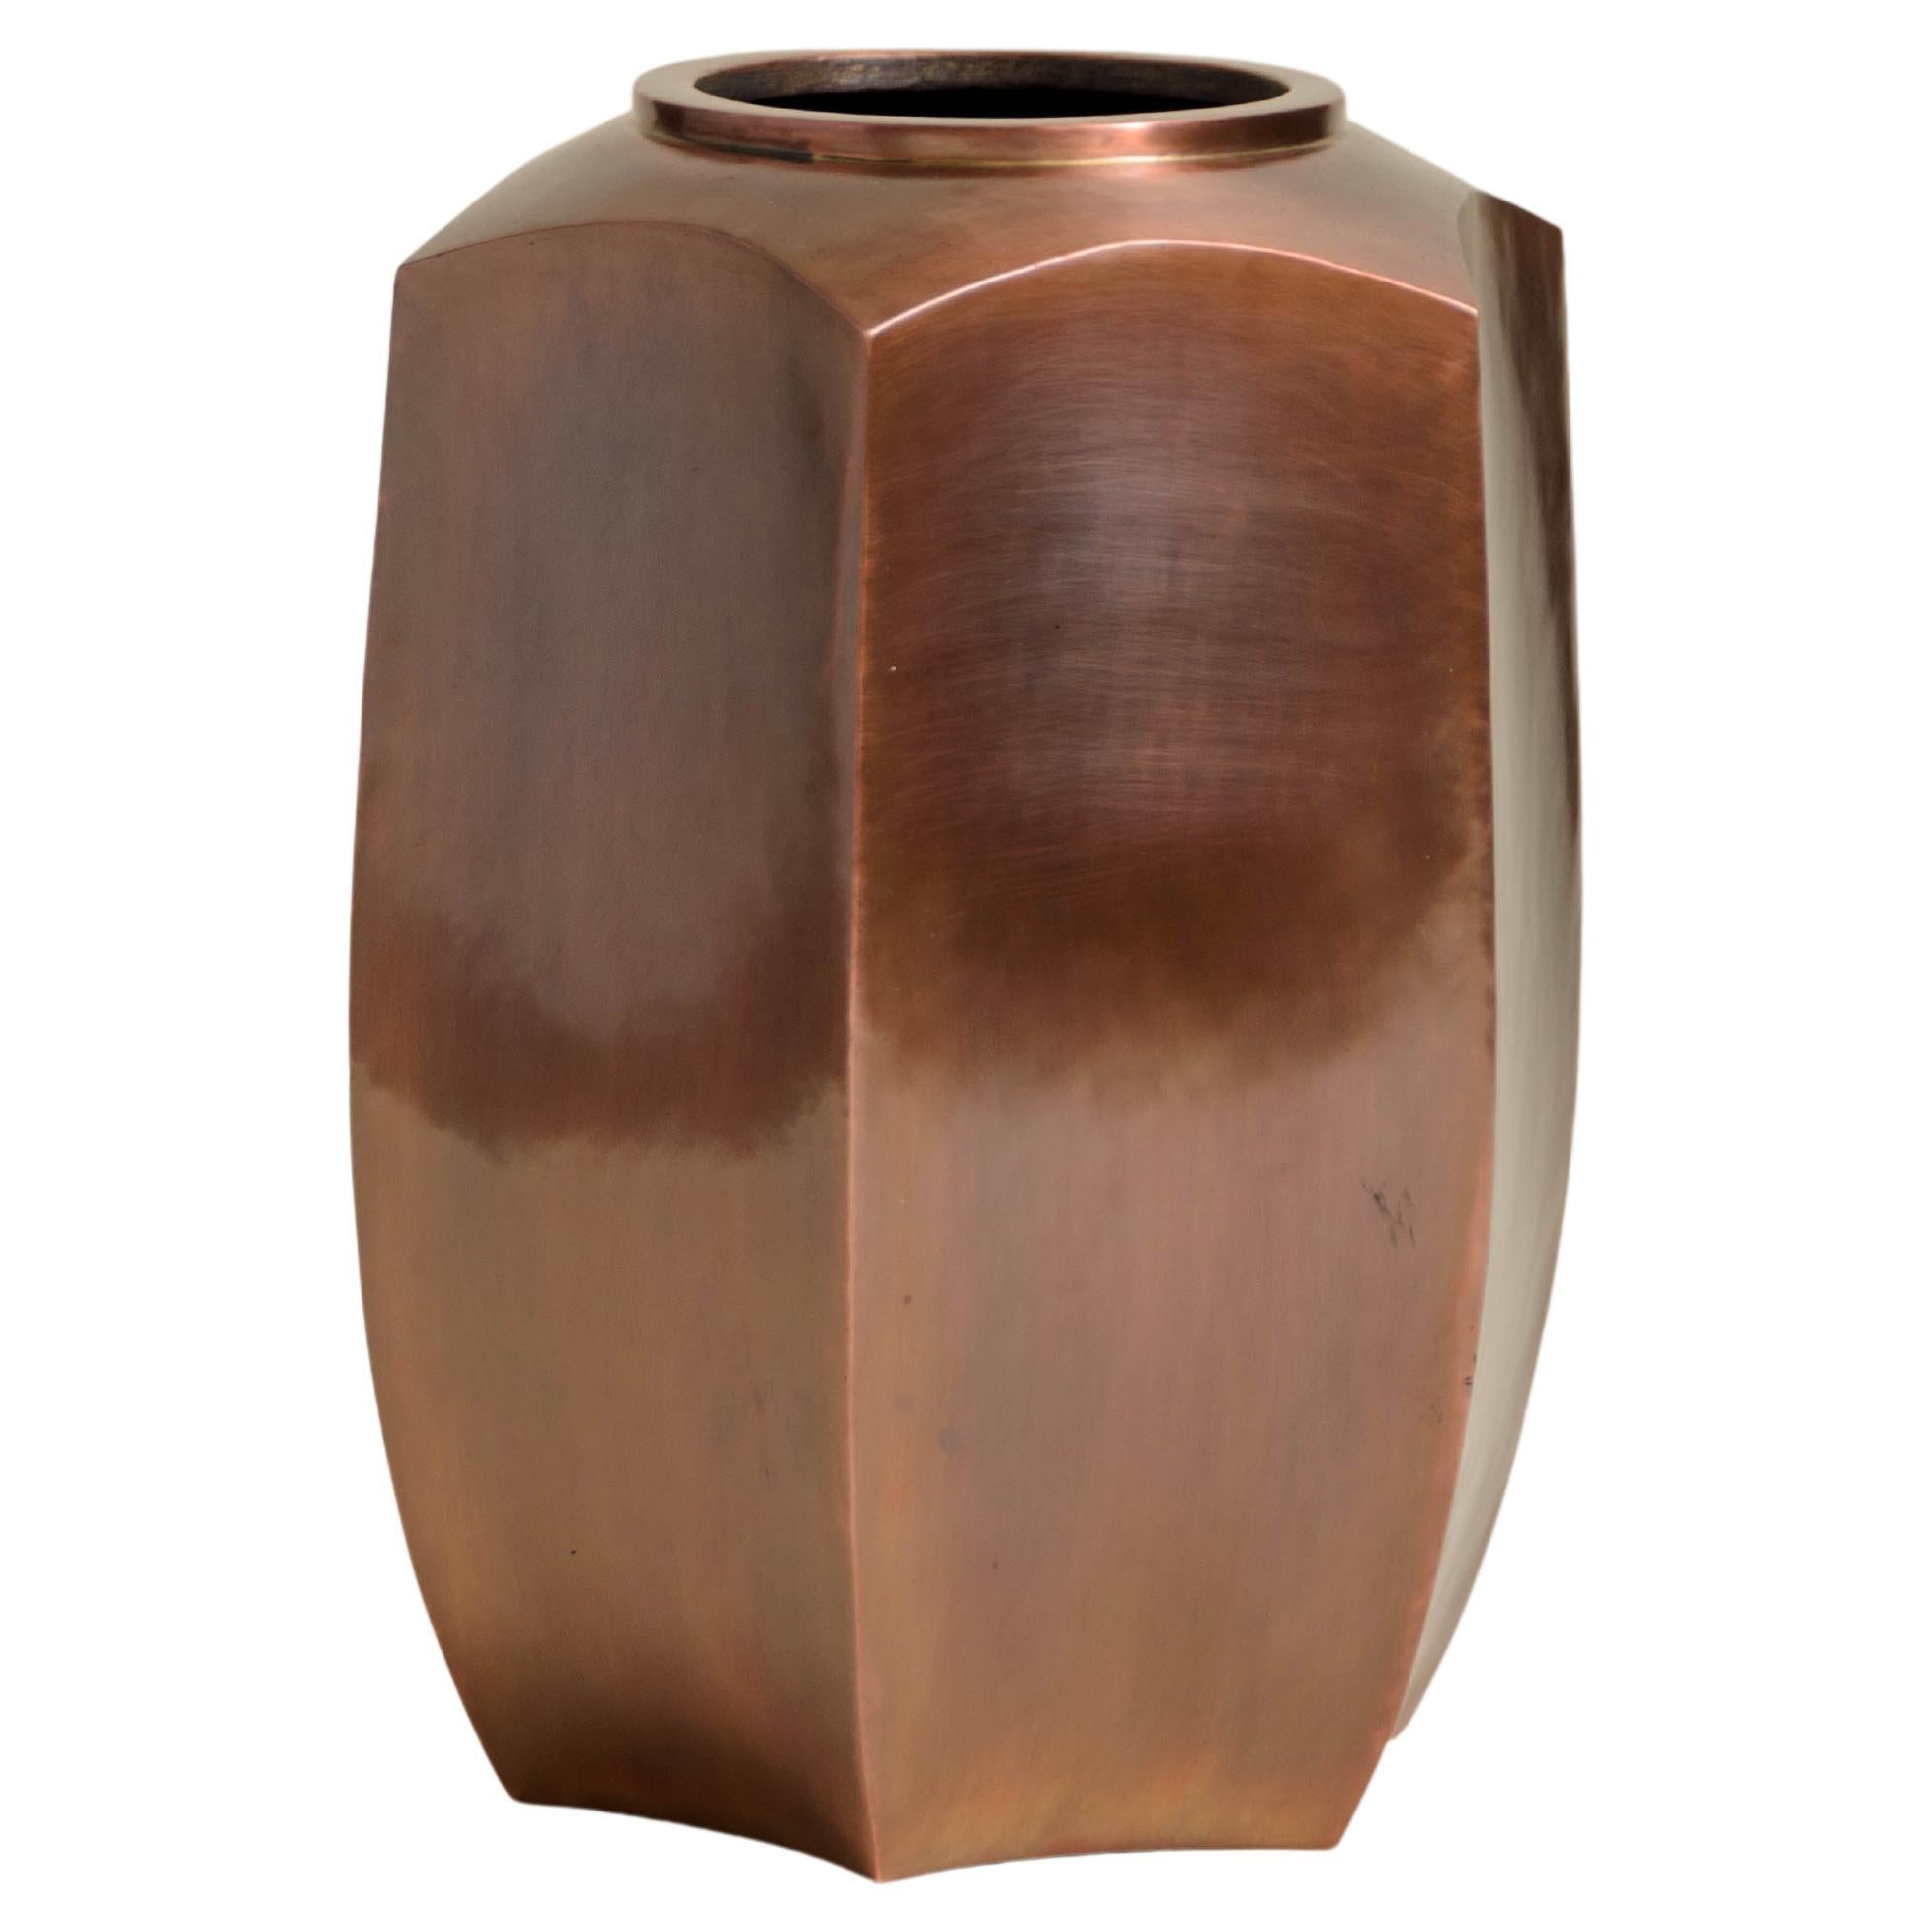 Contemporary Repoussé Hexagonal Tall Jar in Antique Copper by Robert Kuo For Sale